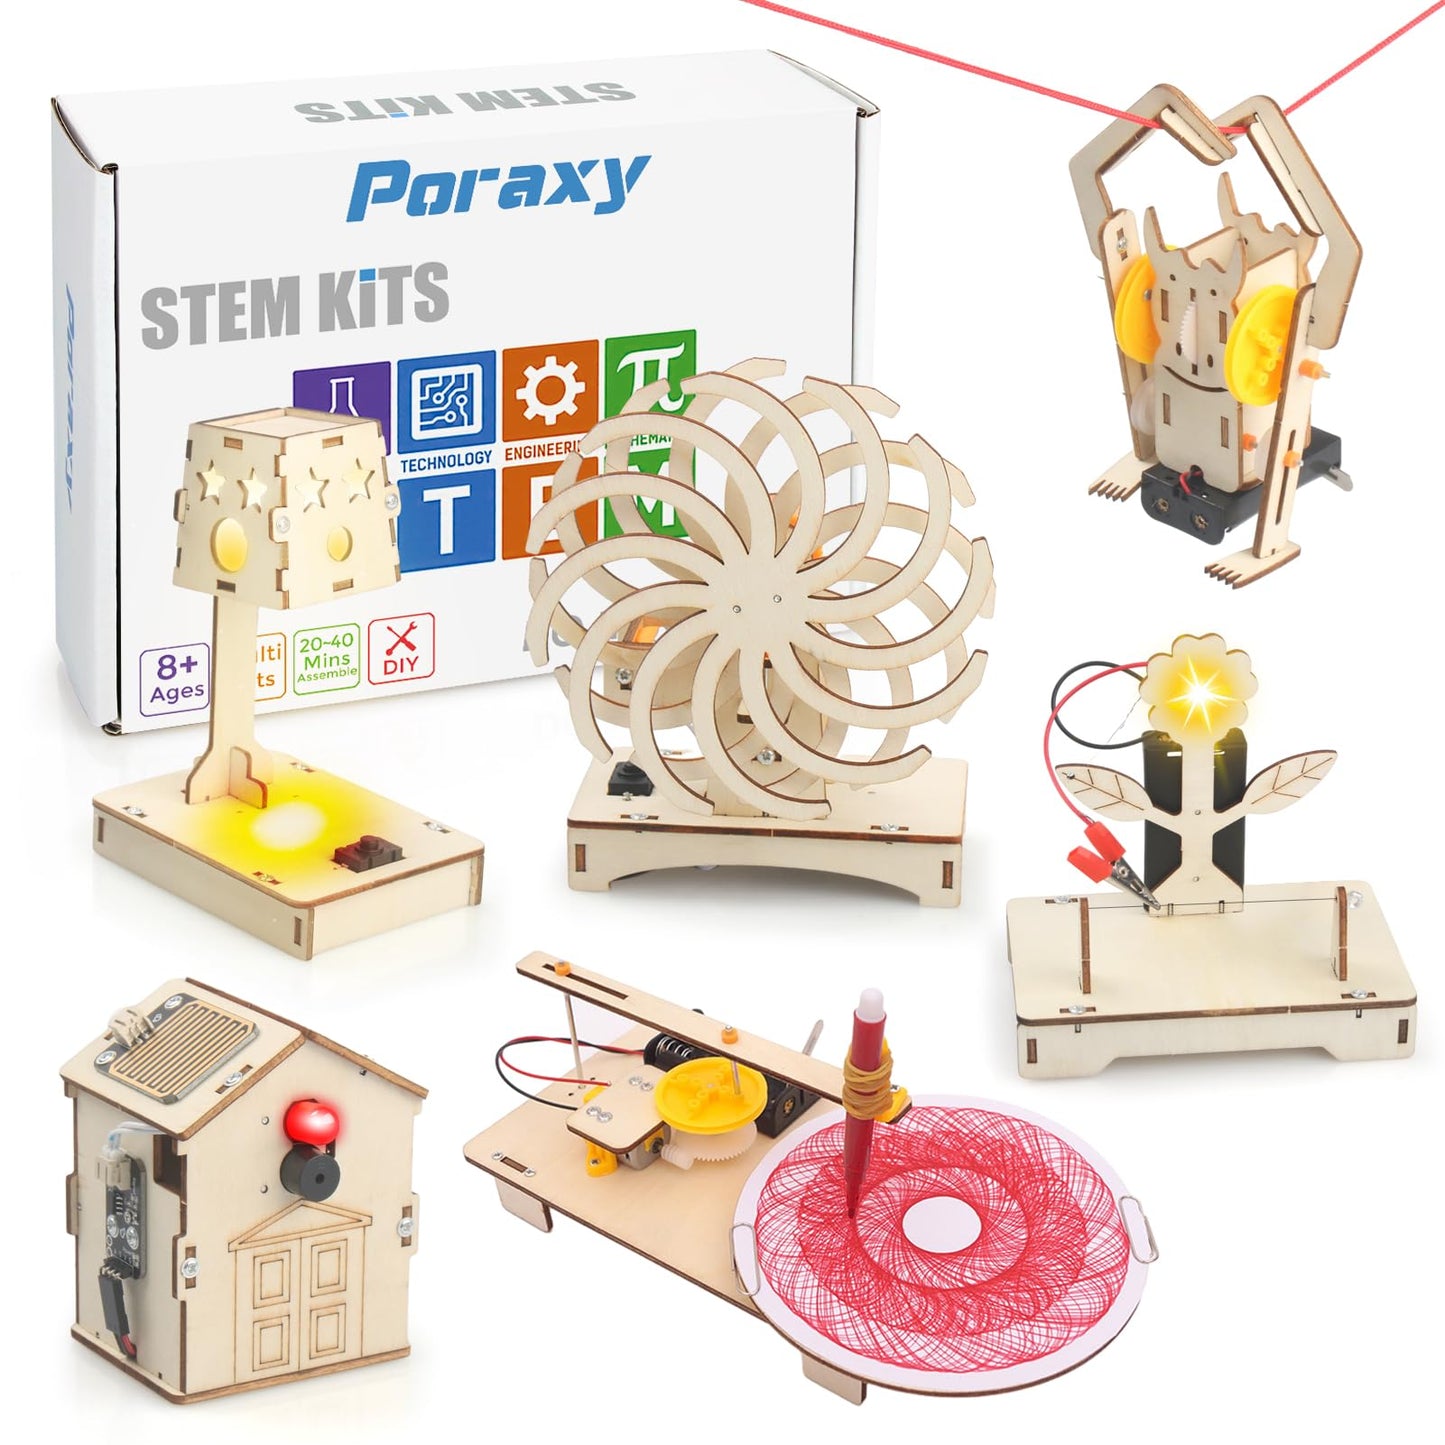 6 in 1 STEM Projects for Kids Ages 8-12, STEM Kits, 3D Wooden Puzzles, STEM Toys Building Kits, Educational Science Model Kits, Birthday Gifts for Boys and Girls Ages 8 9 10 11 12 13 Years Old